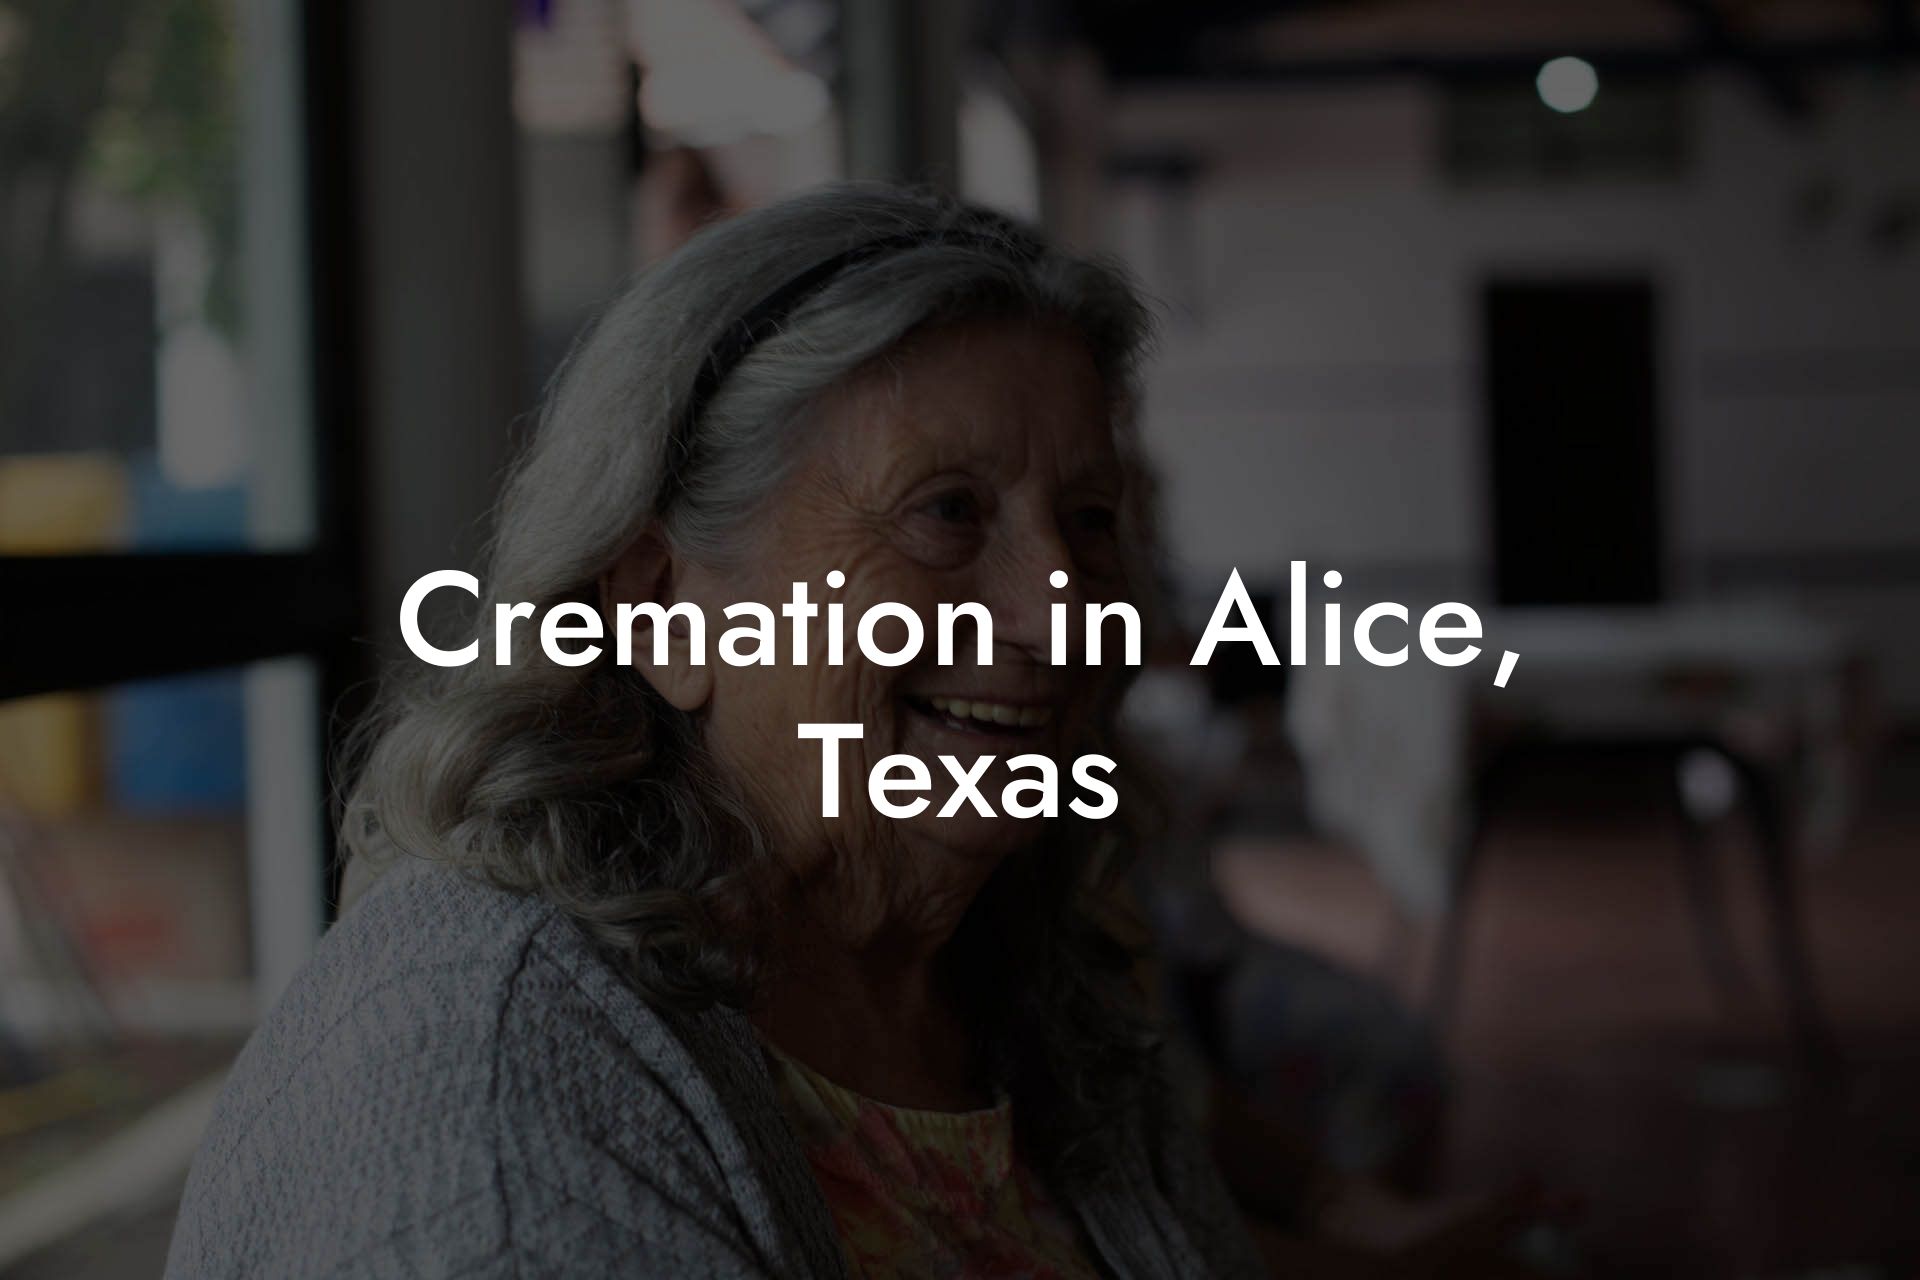 Cremation in Alice, Texas